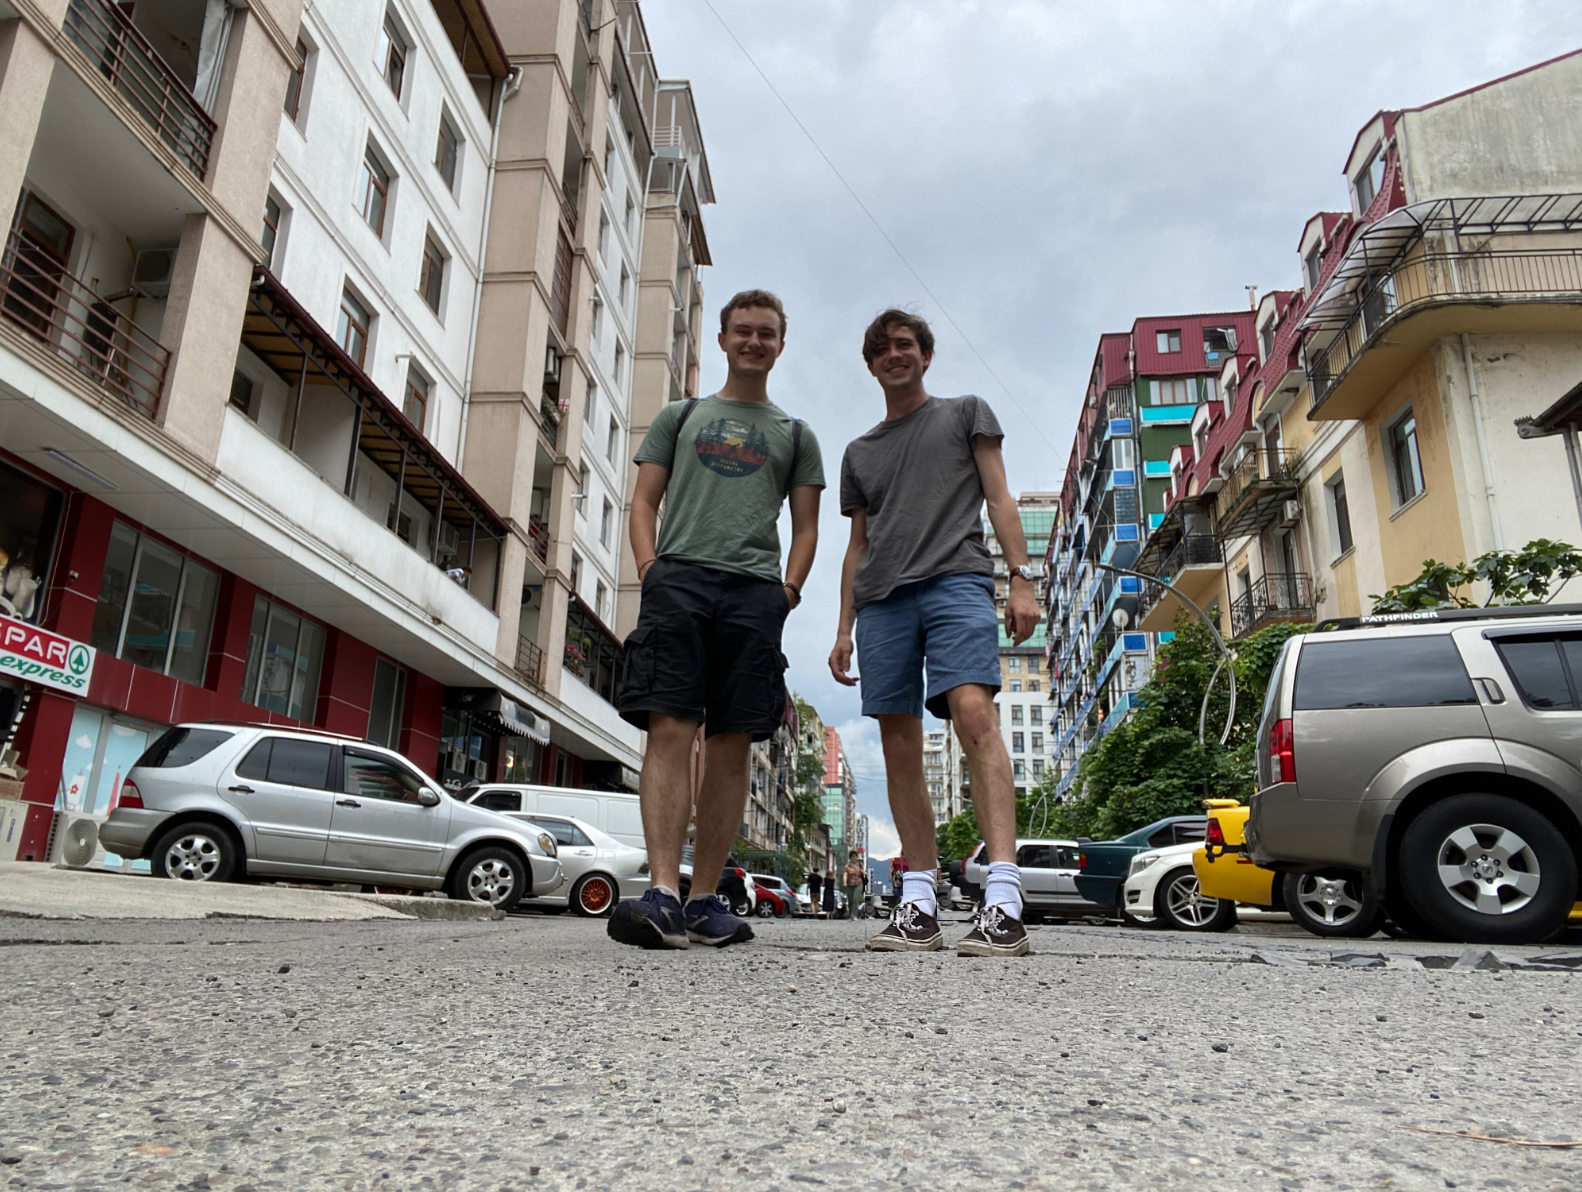 Zeke Lloyd '24 and Michael Braithwaite '24 stand together in the middle of Batumi. Photo by Zeke Lloyd '24.